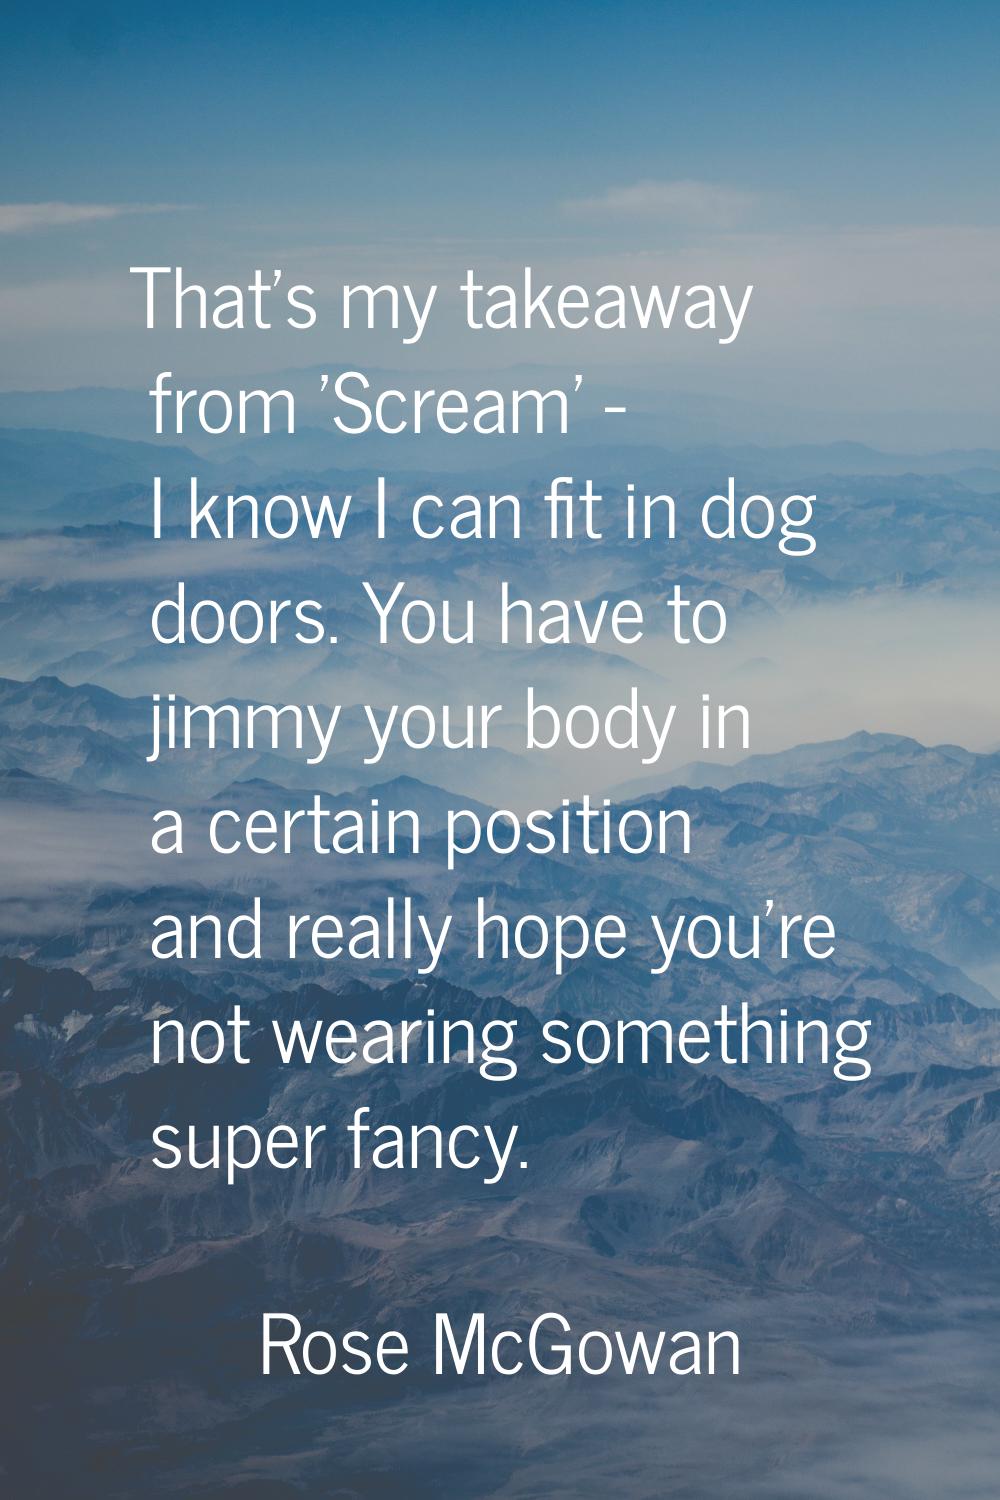 That's my takeaway from 'Scream' - I know I can fit in dog doors. You have to jimmy your body in a 